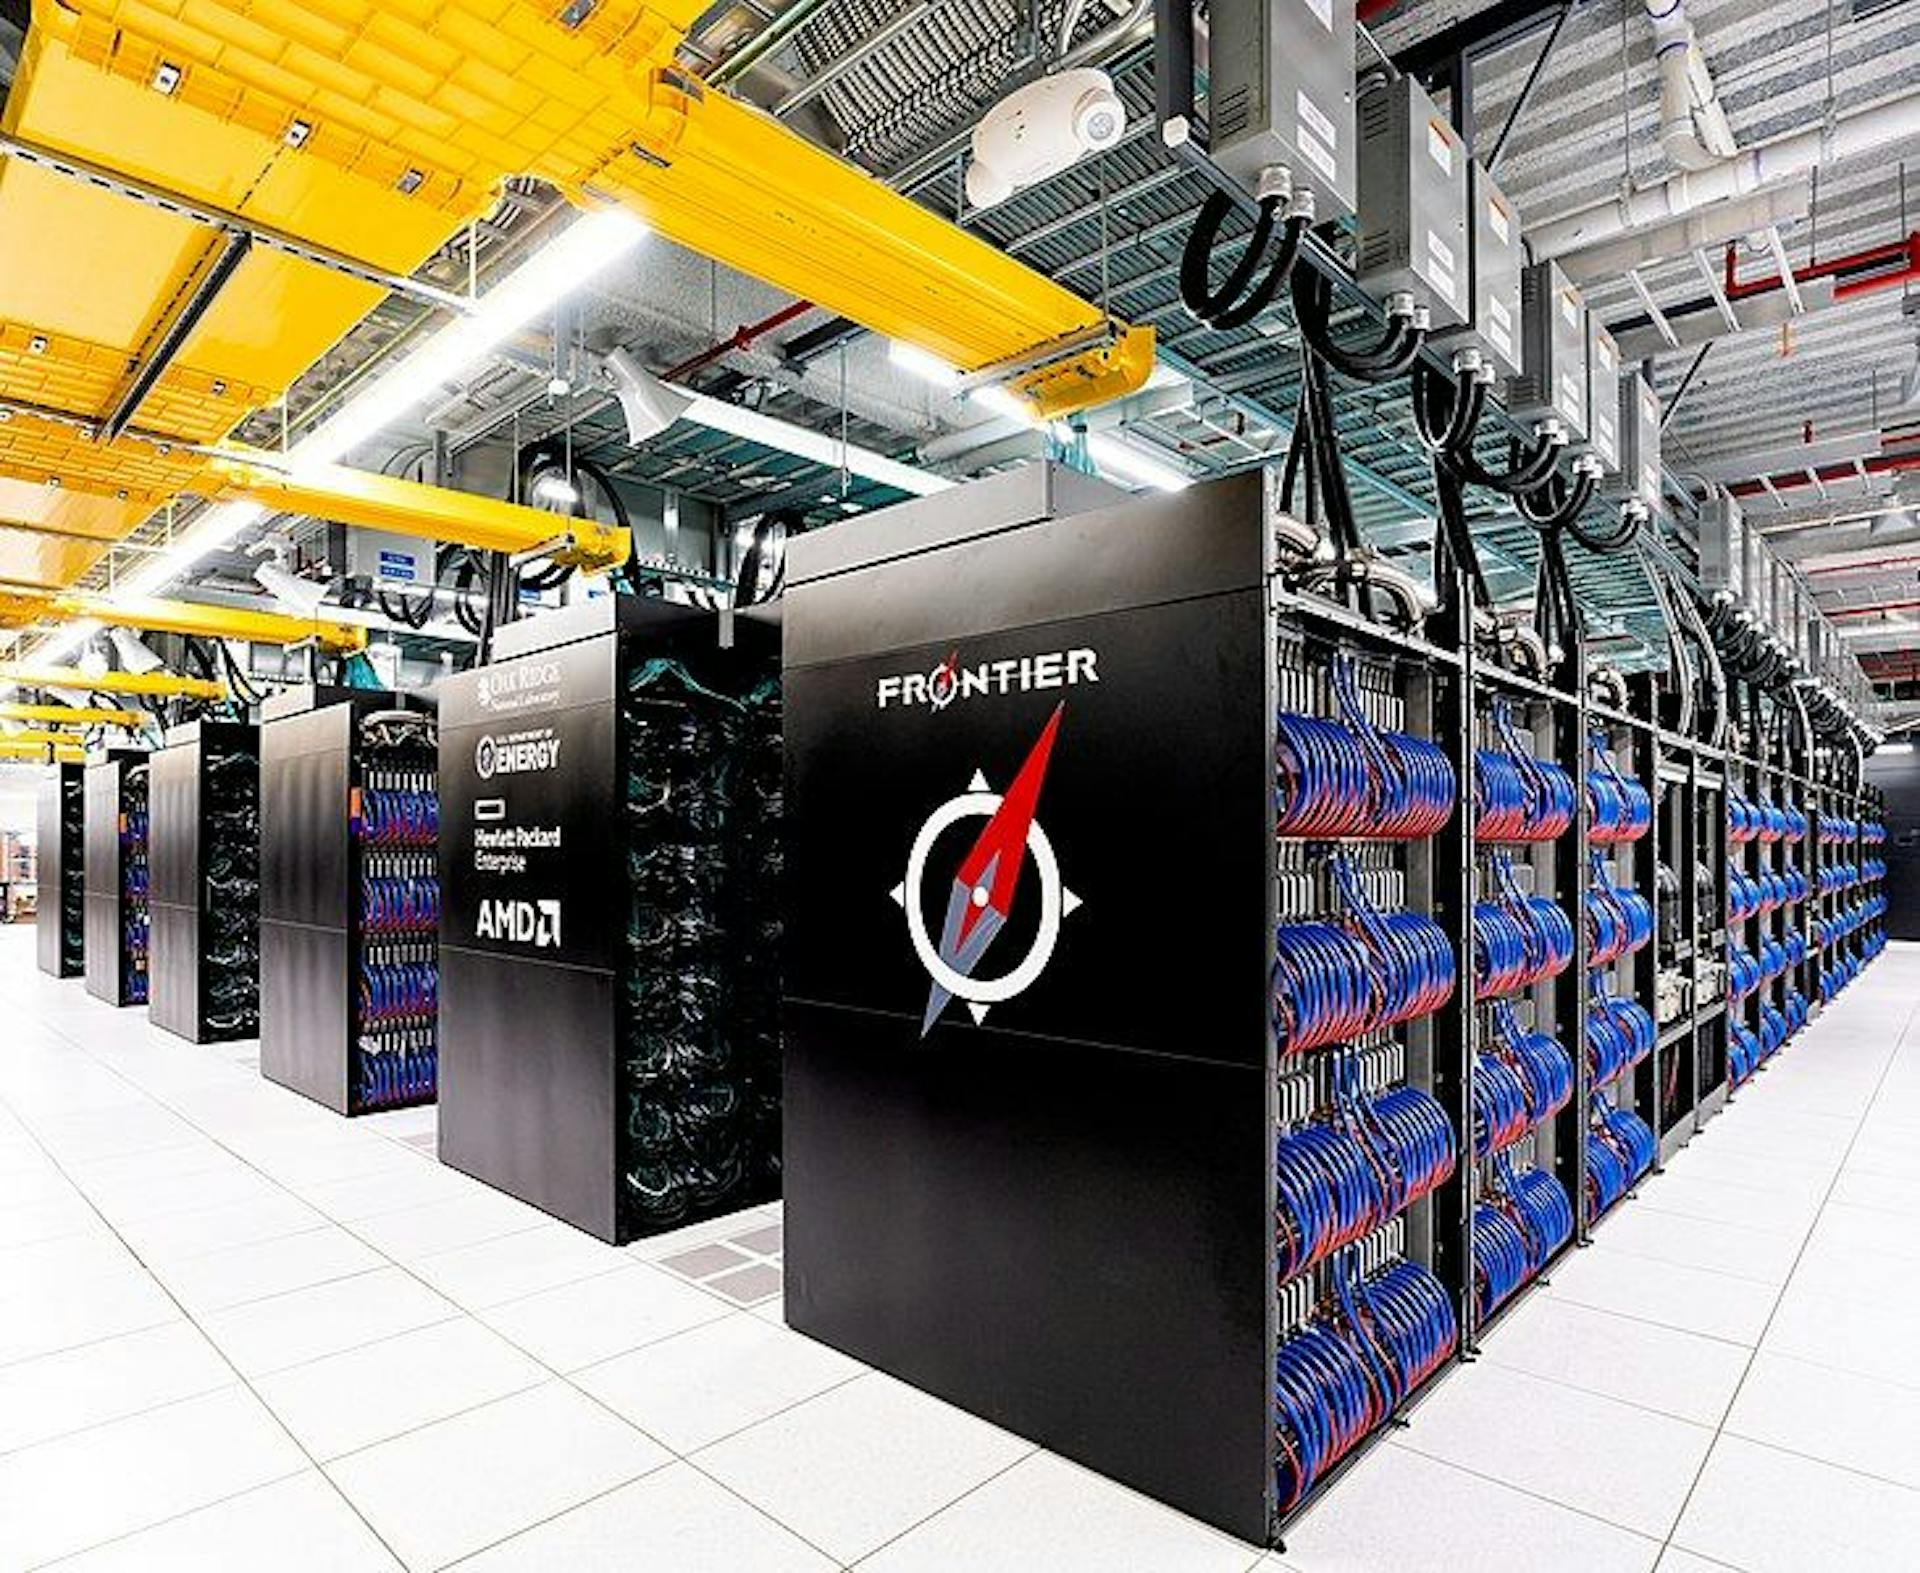 Frontier. The world’s fastest classical supercomputer